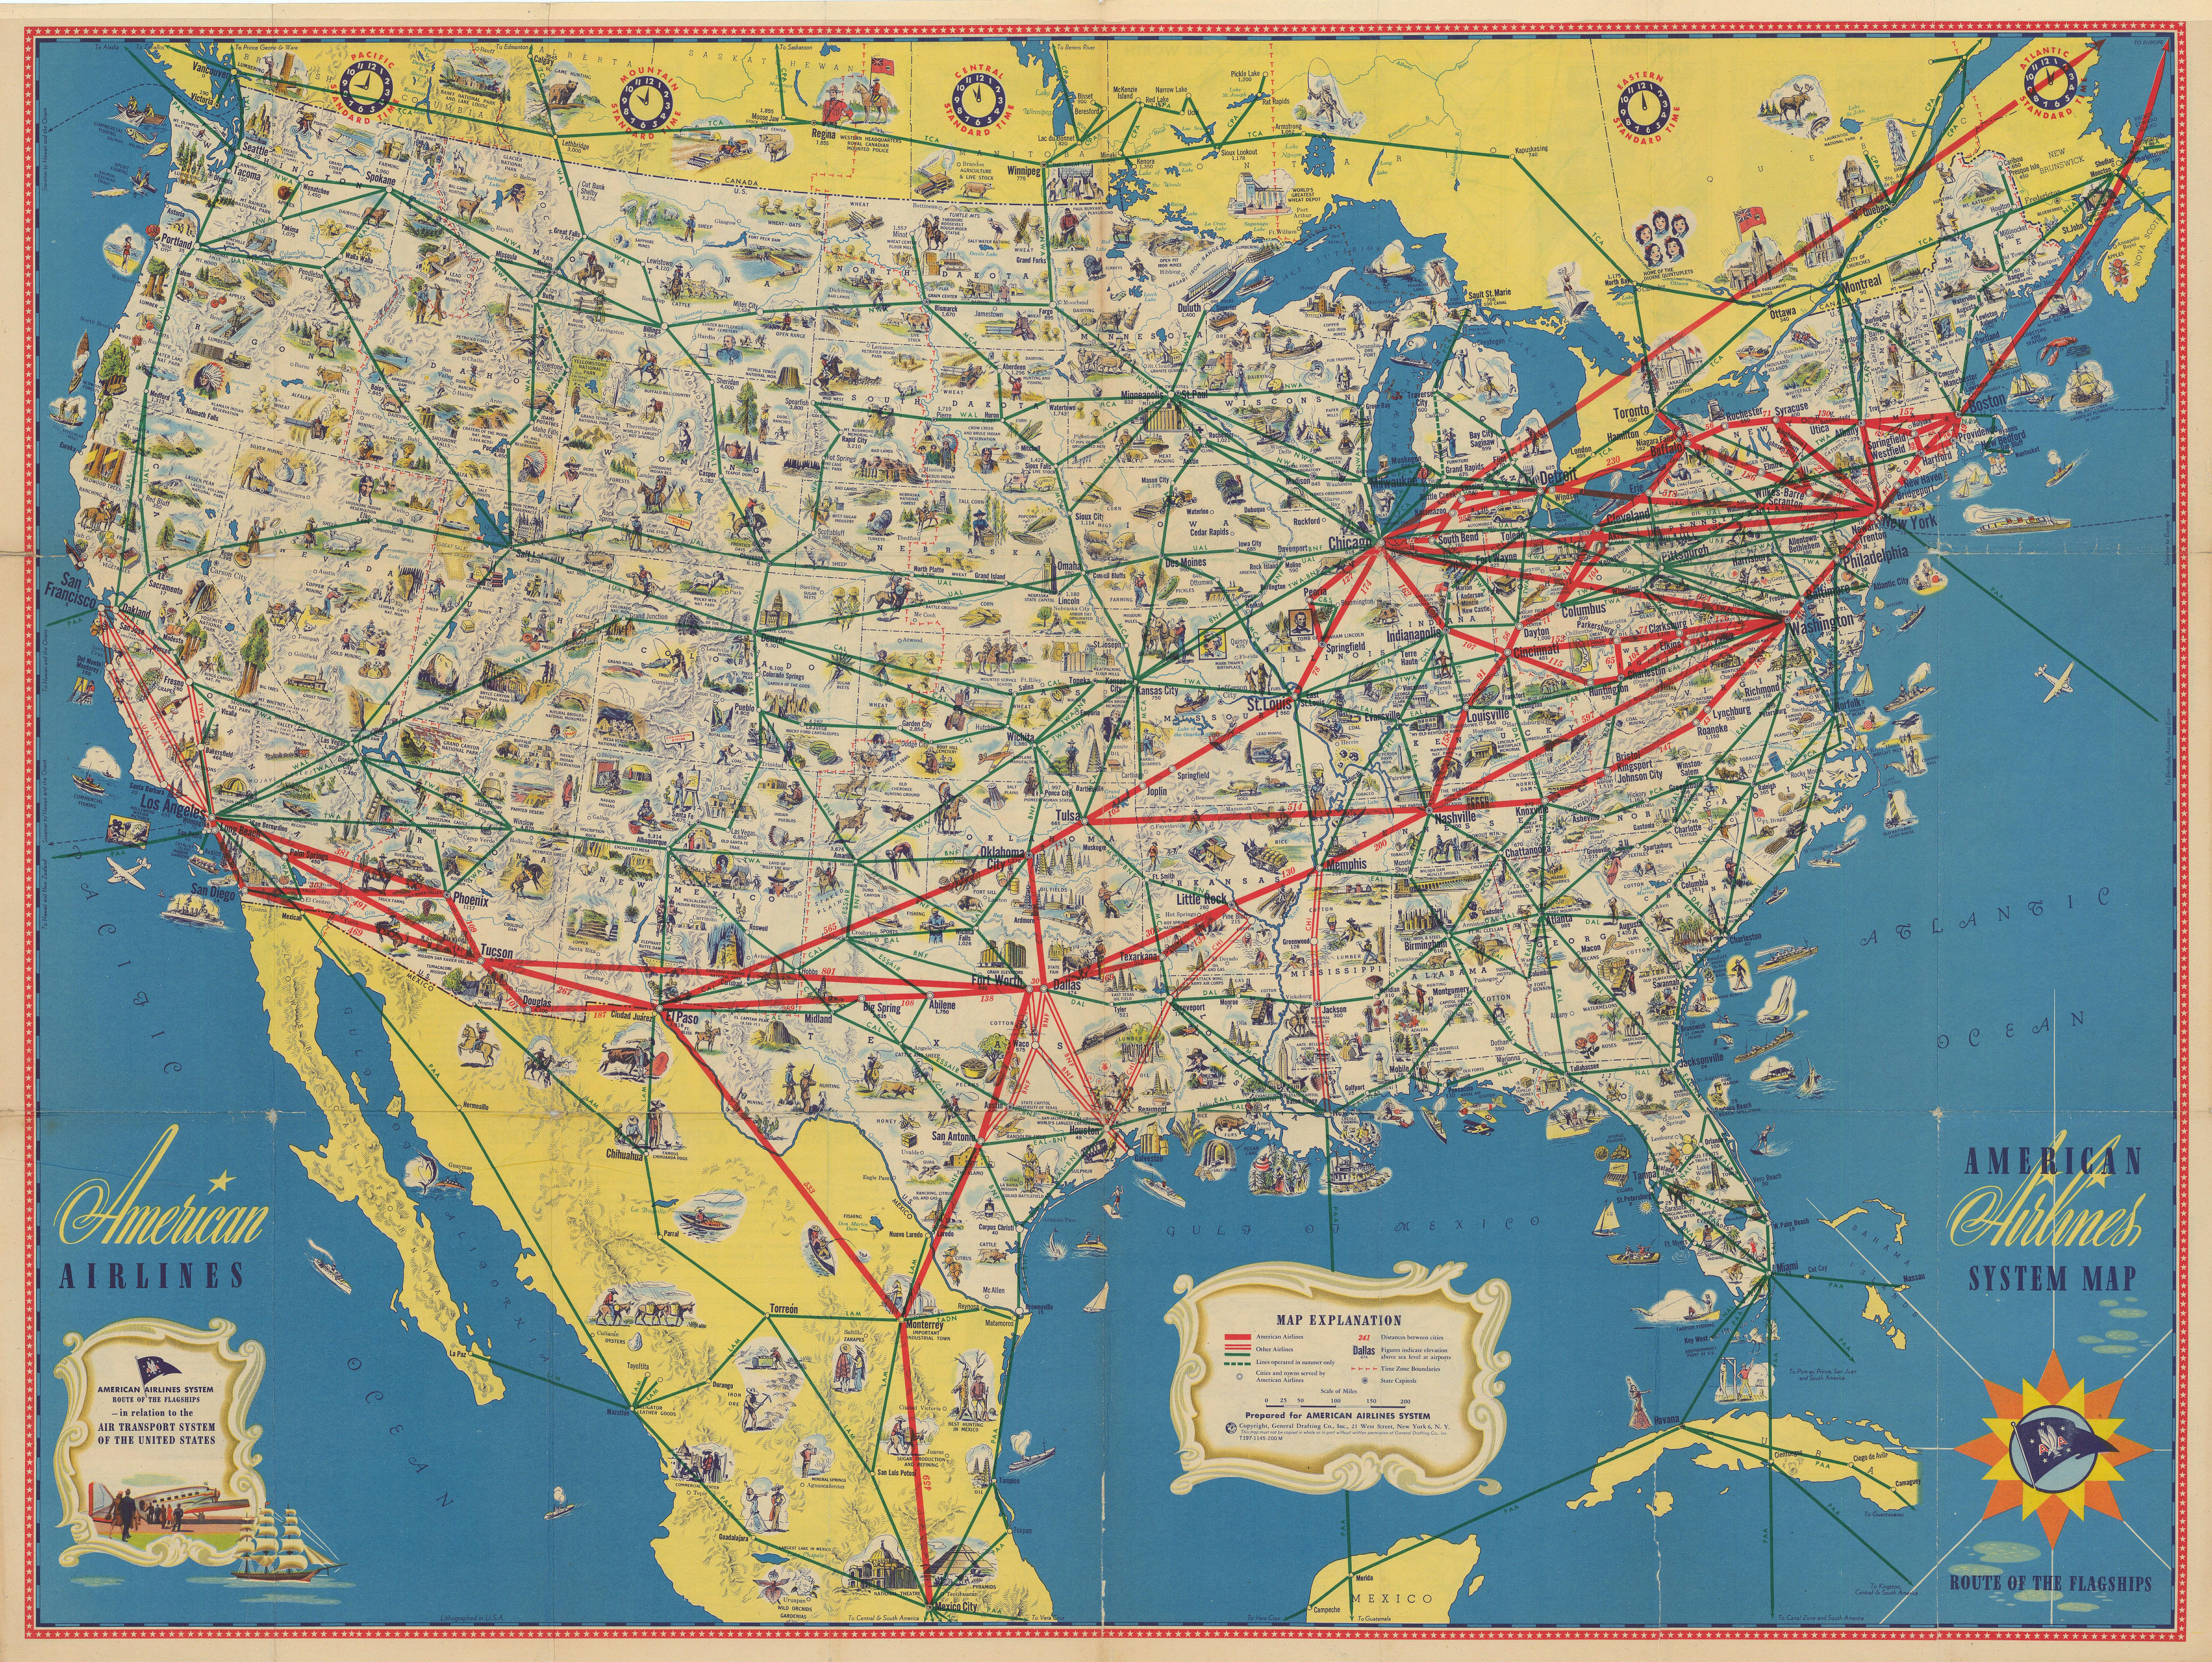 Associate Product American Airlines System Map. Route of the Flagships. Pictorial 24"x32" c1945